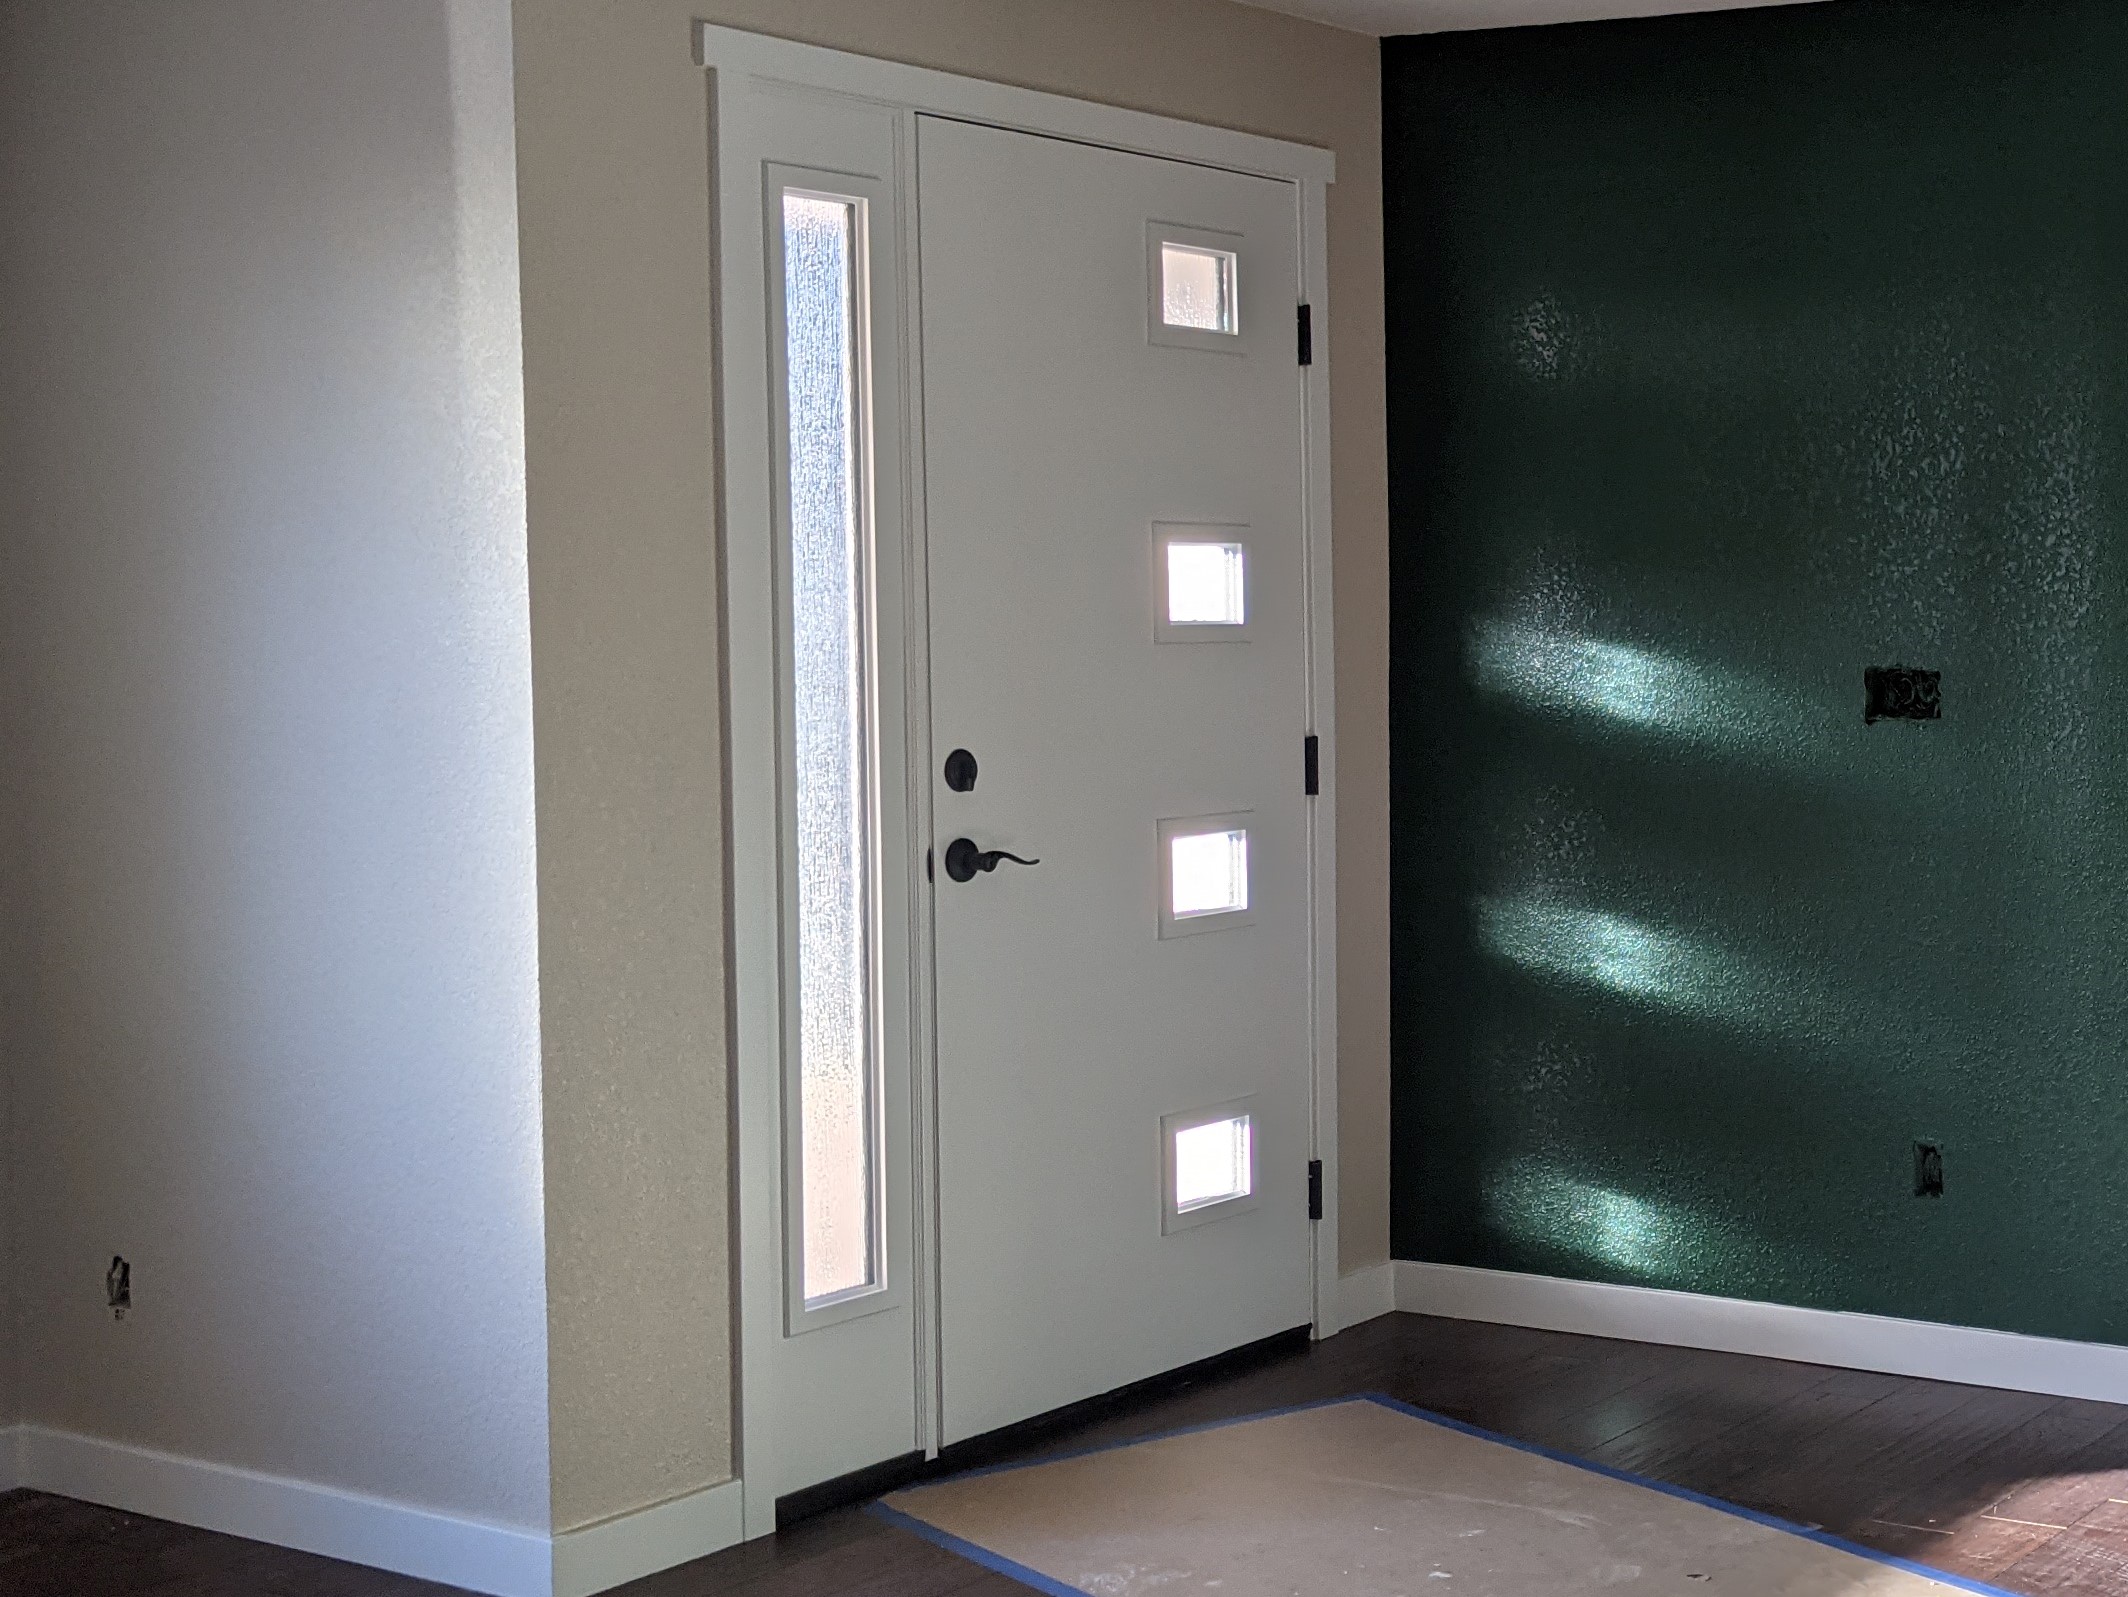 AFTER The windows in this front door let the light in while the obscured glass protects the homeowners' privacy.